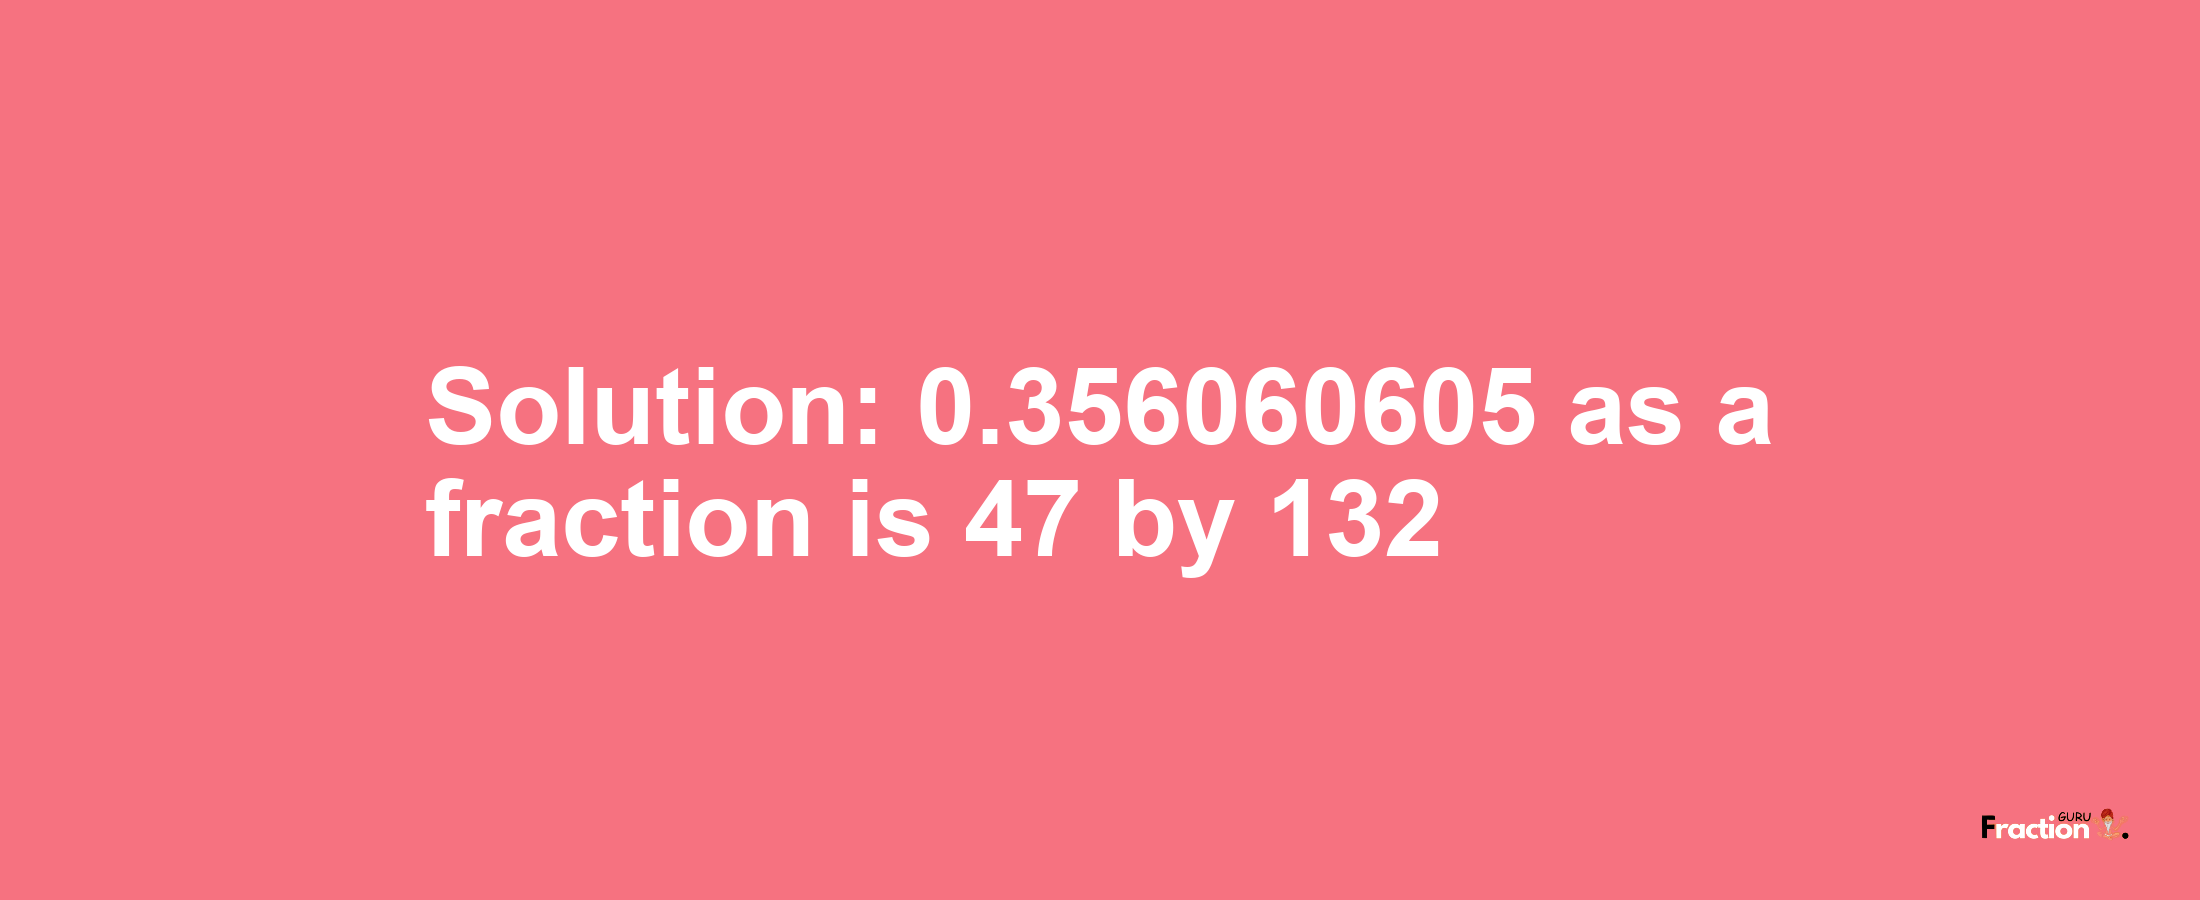 Solution:0.356060605 as a fraction is 47/132